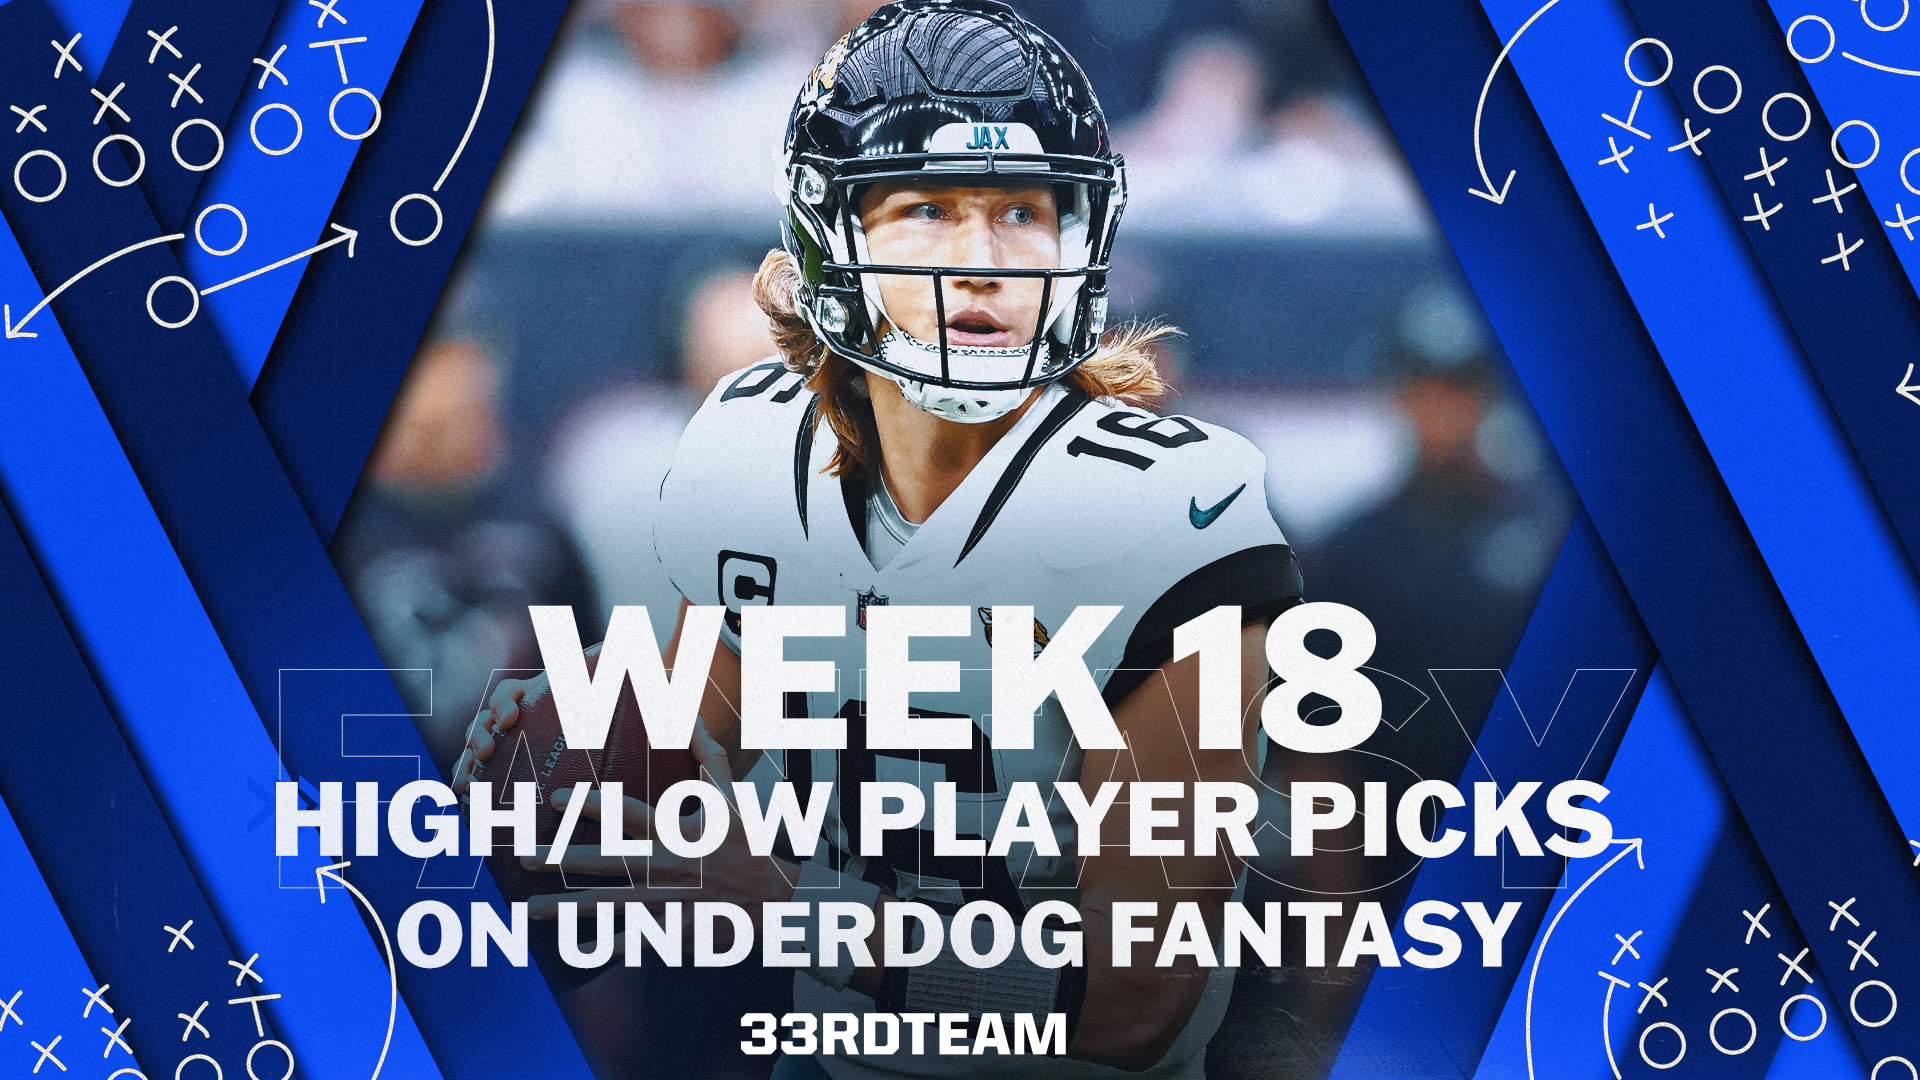 Week 18 Underdog High/Low Picks: Bet on Lawrence Coming Up Big